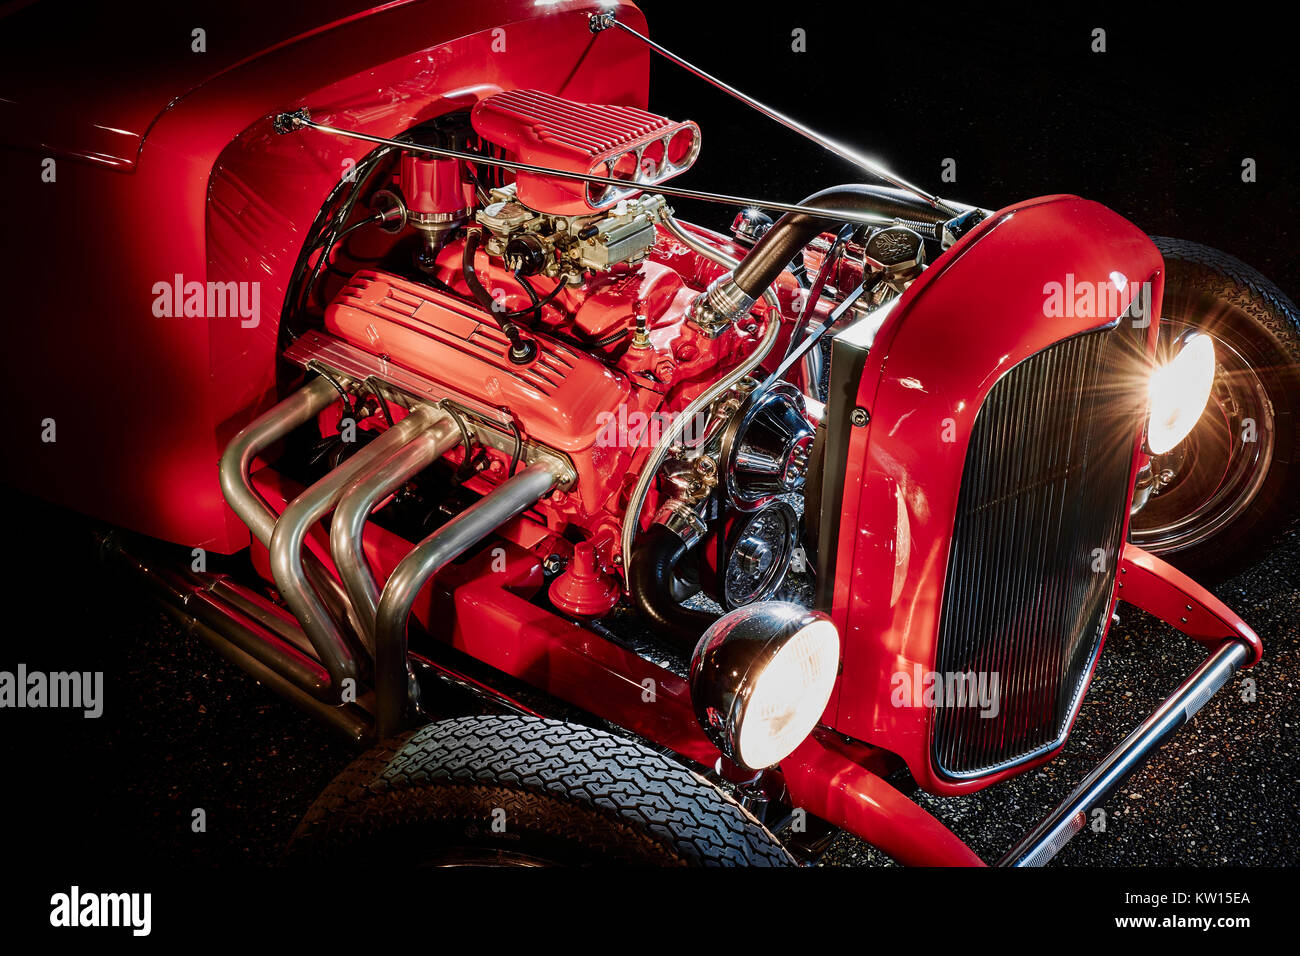 Isolated on black, red Ford hot rod engine showing the detail of the headers, pipes and four barrel carburetor, shot at night using light painting. Stock Photo